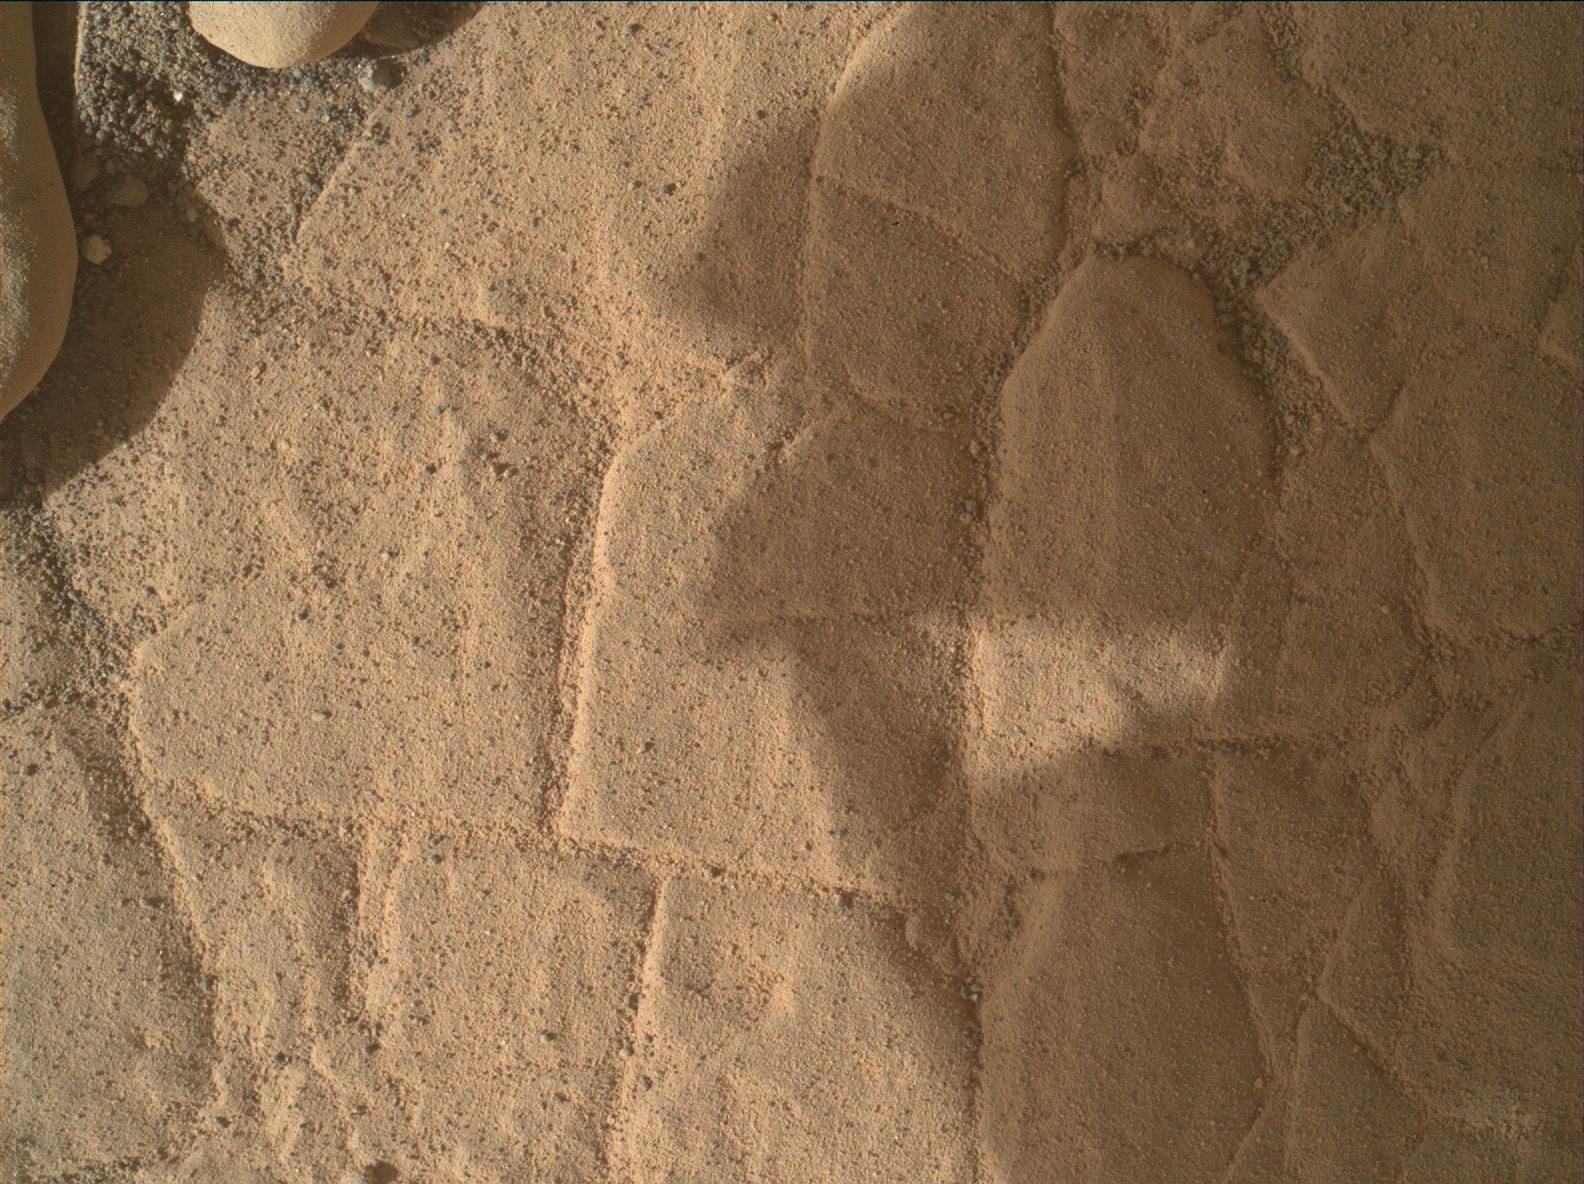 Nasa's Mars rover Curiosity acquired this image using its Mars Hand Lens Imager (MAHLI) on Sol 2480